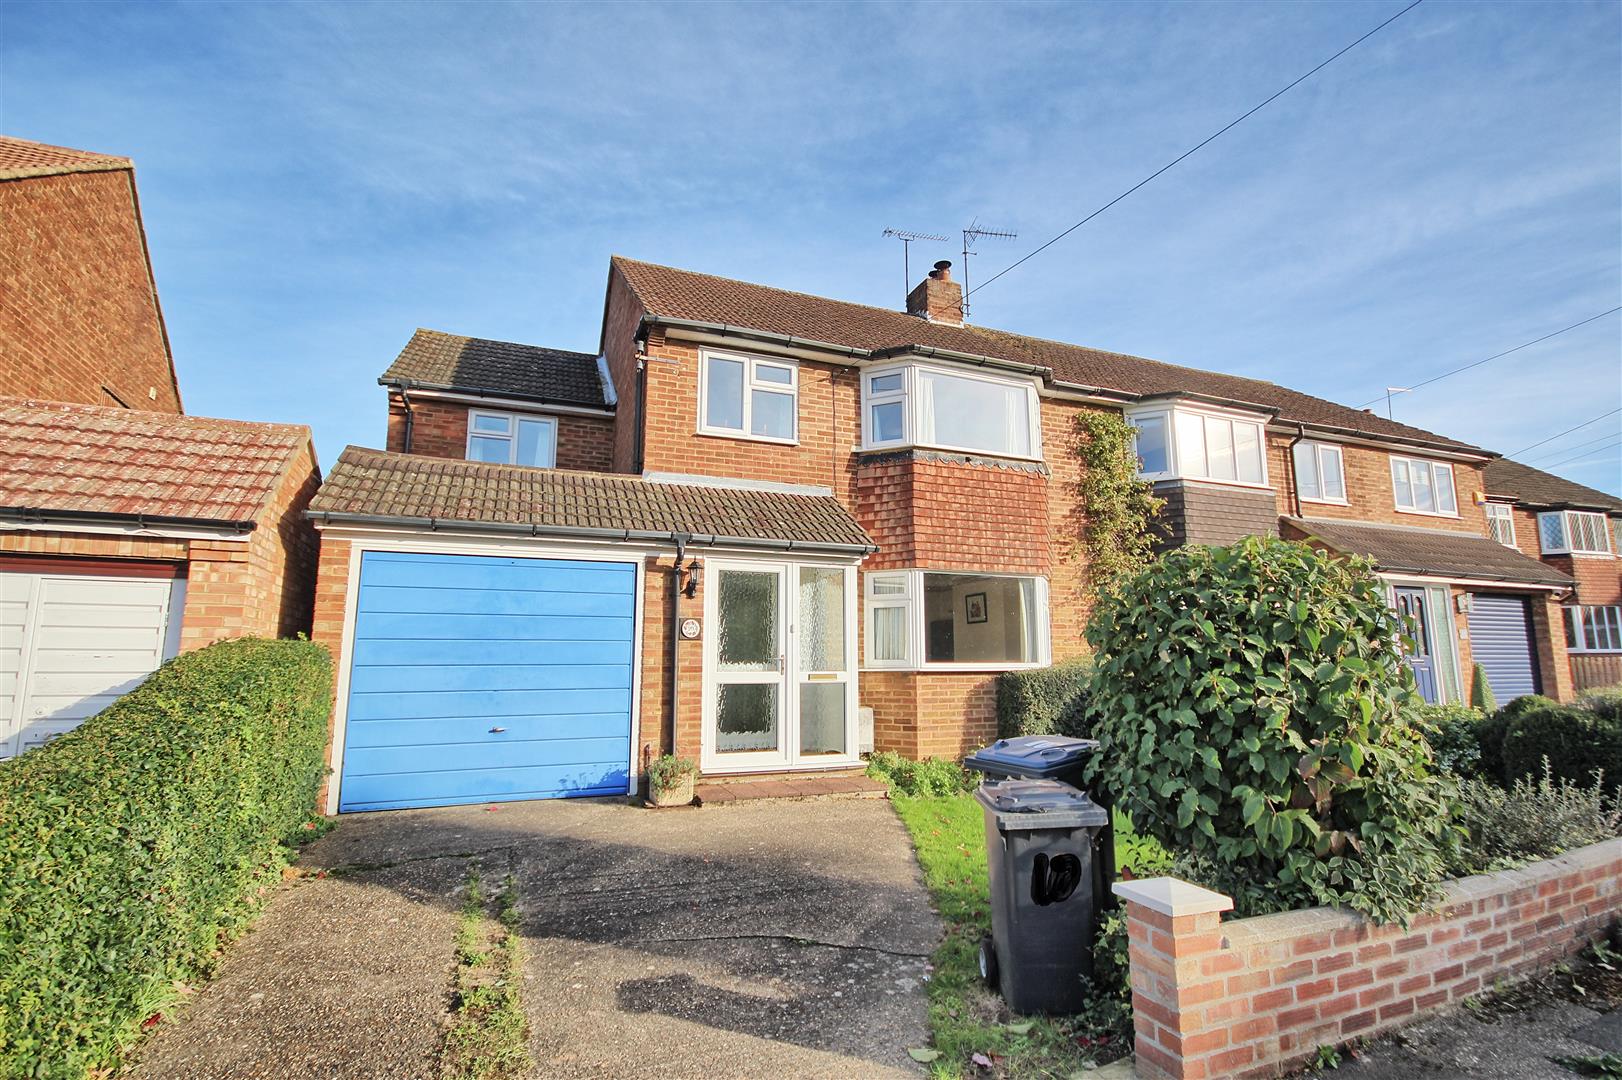 WICKLANDS ROAD, HUNSDON - CHAIN FREE